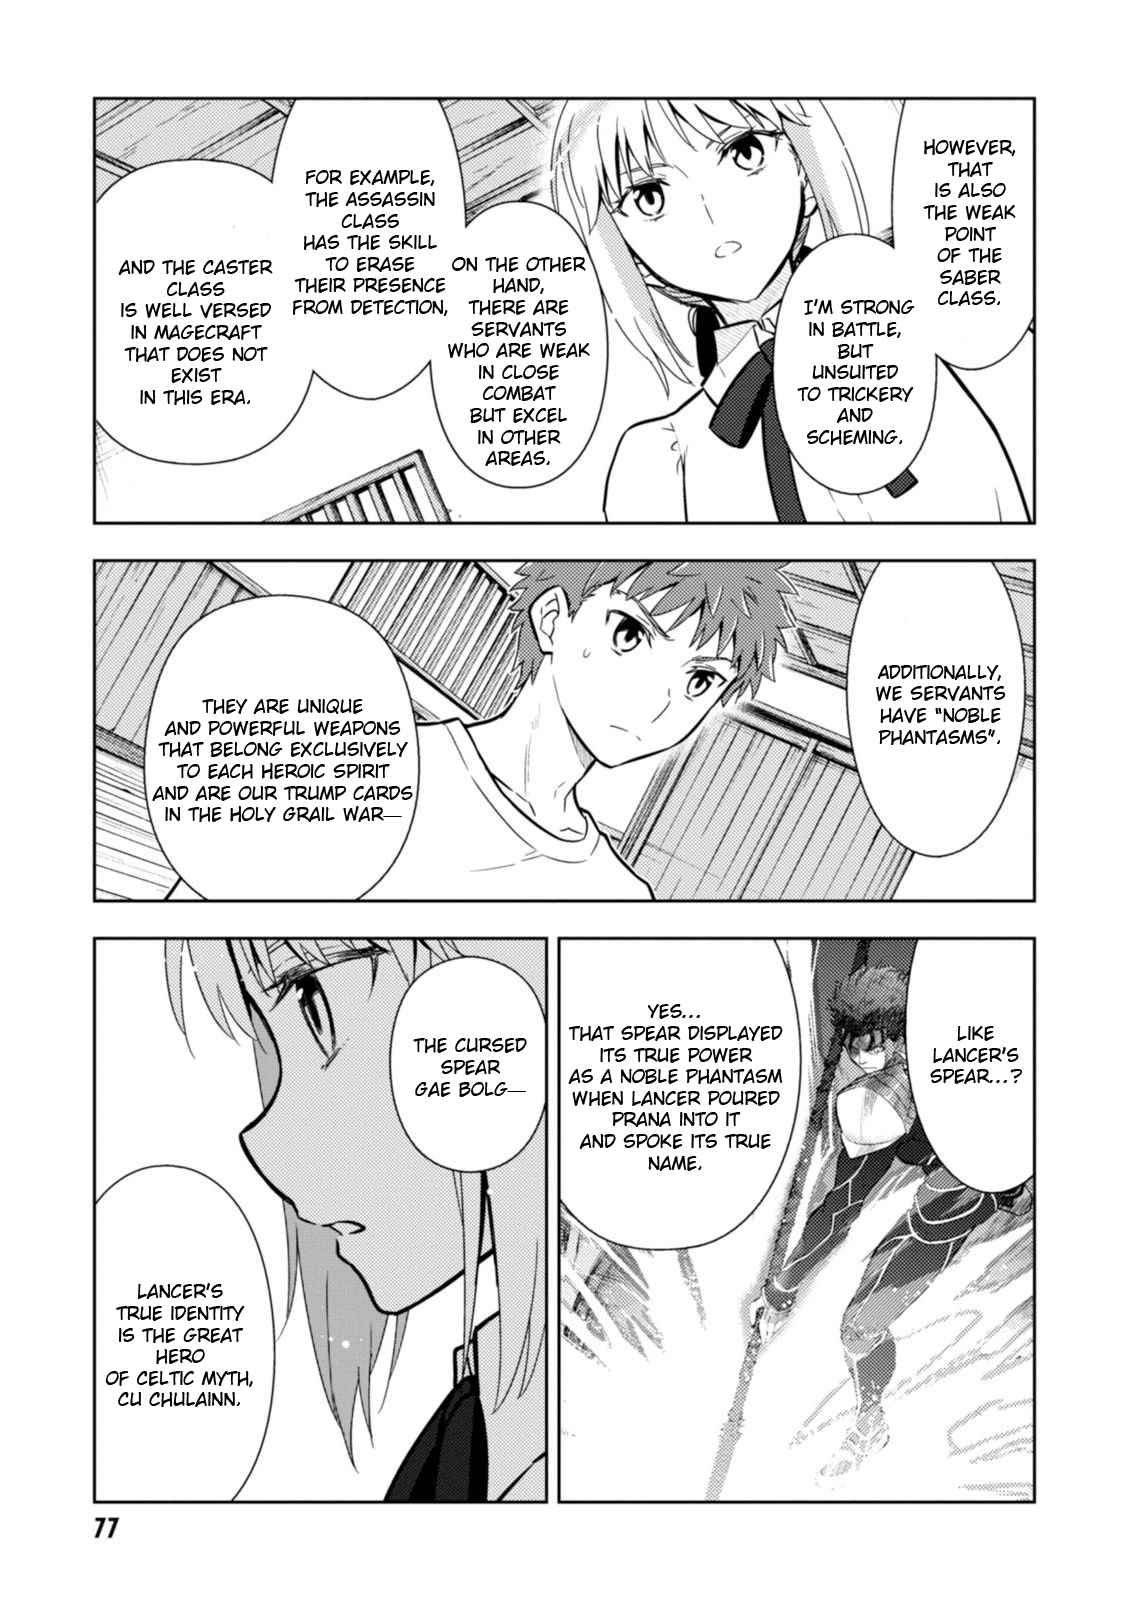 Fate/stay night: Heaven's Feel Ch. 13 Day 4 / The Holy Grail War and Its Origins (2)